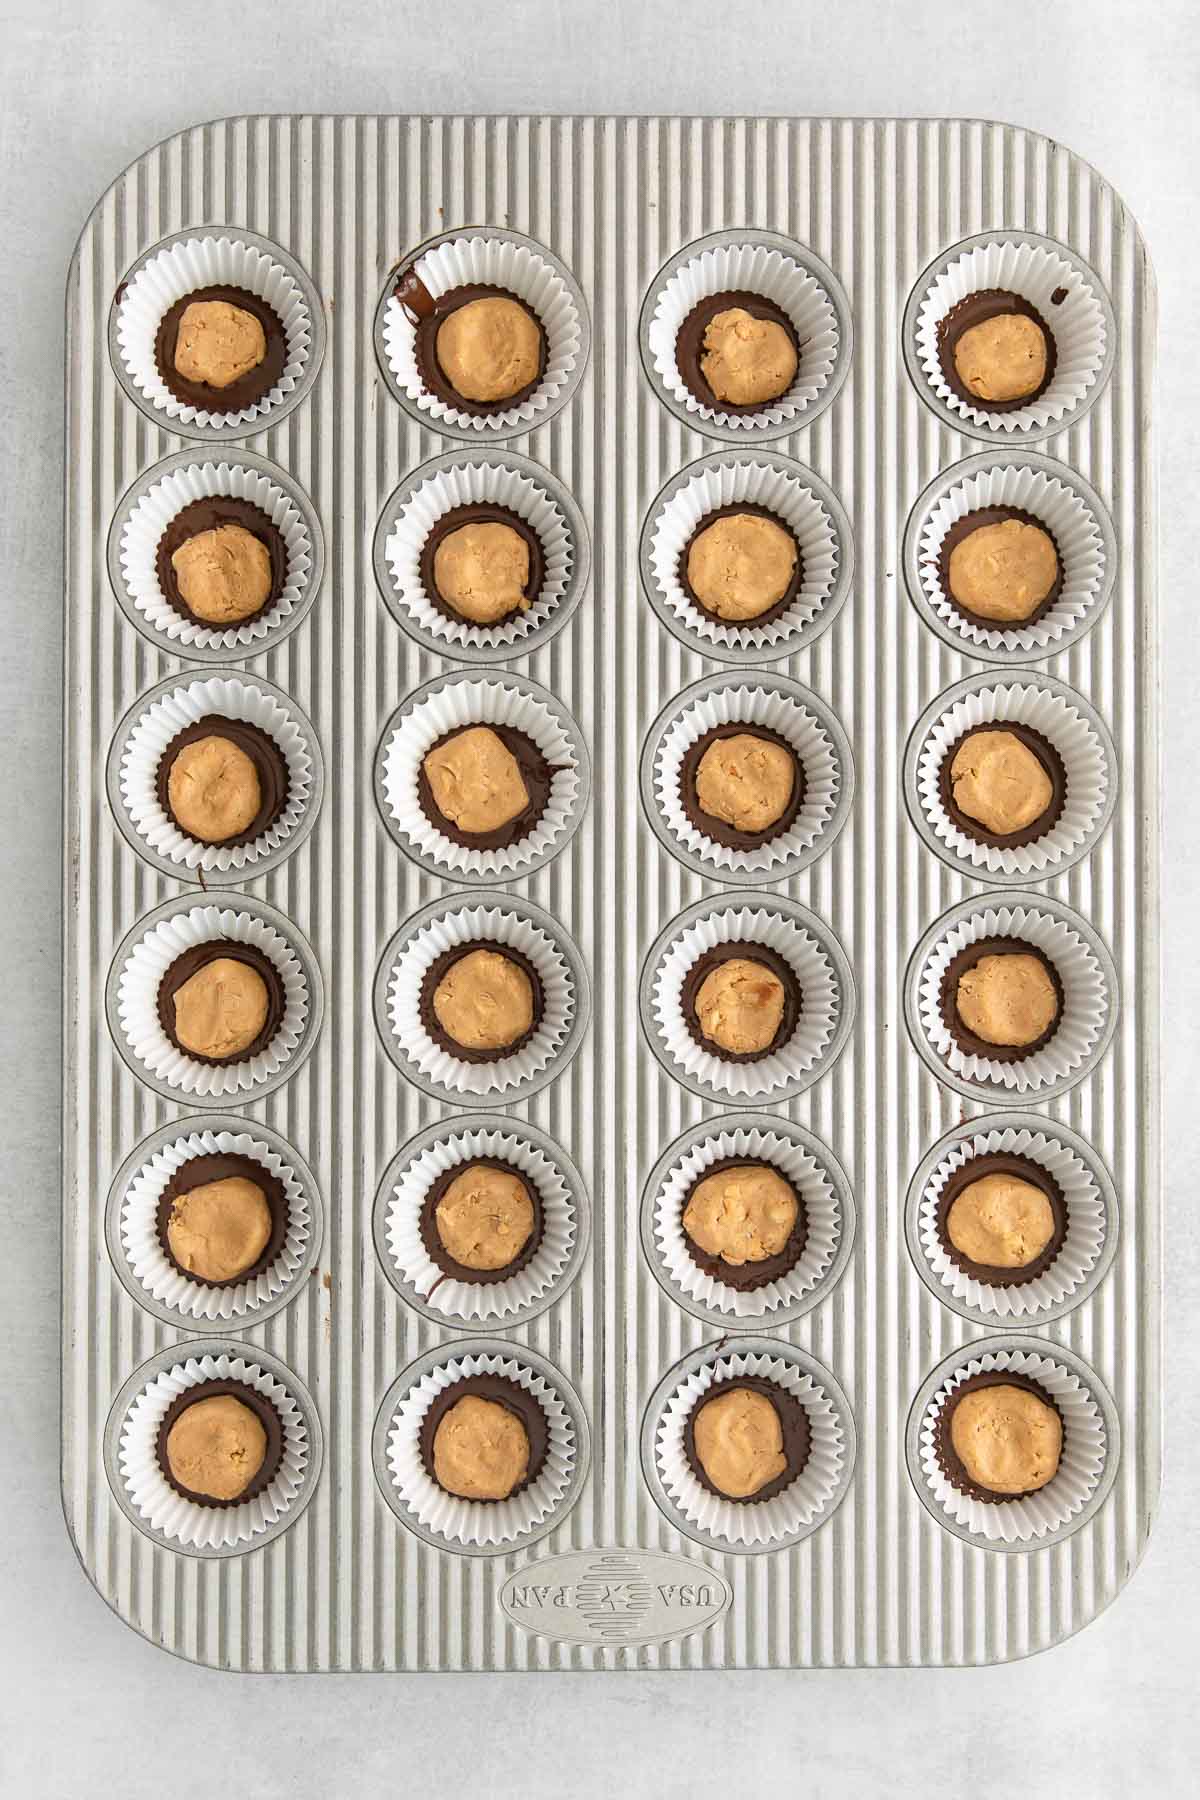 lined mini muffin tin with chocolate and peanut butter dollop on top.